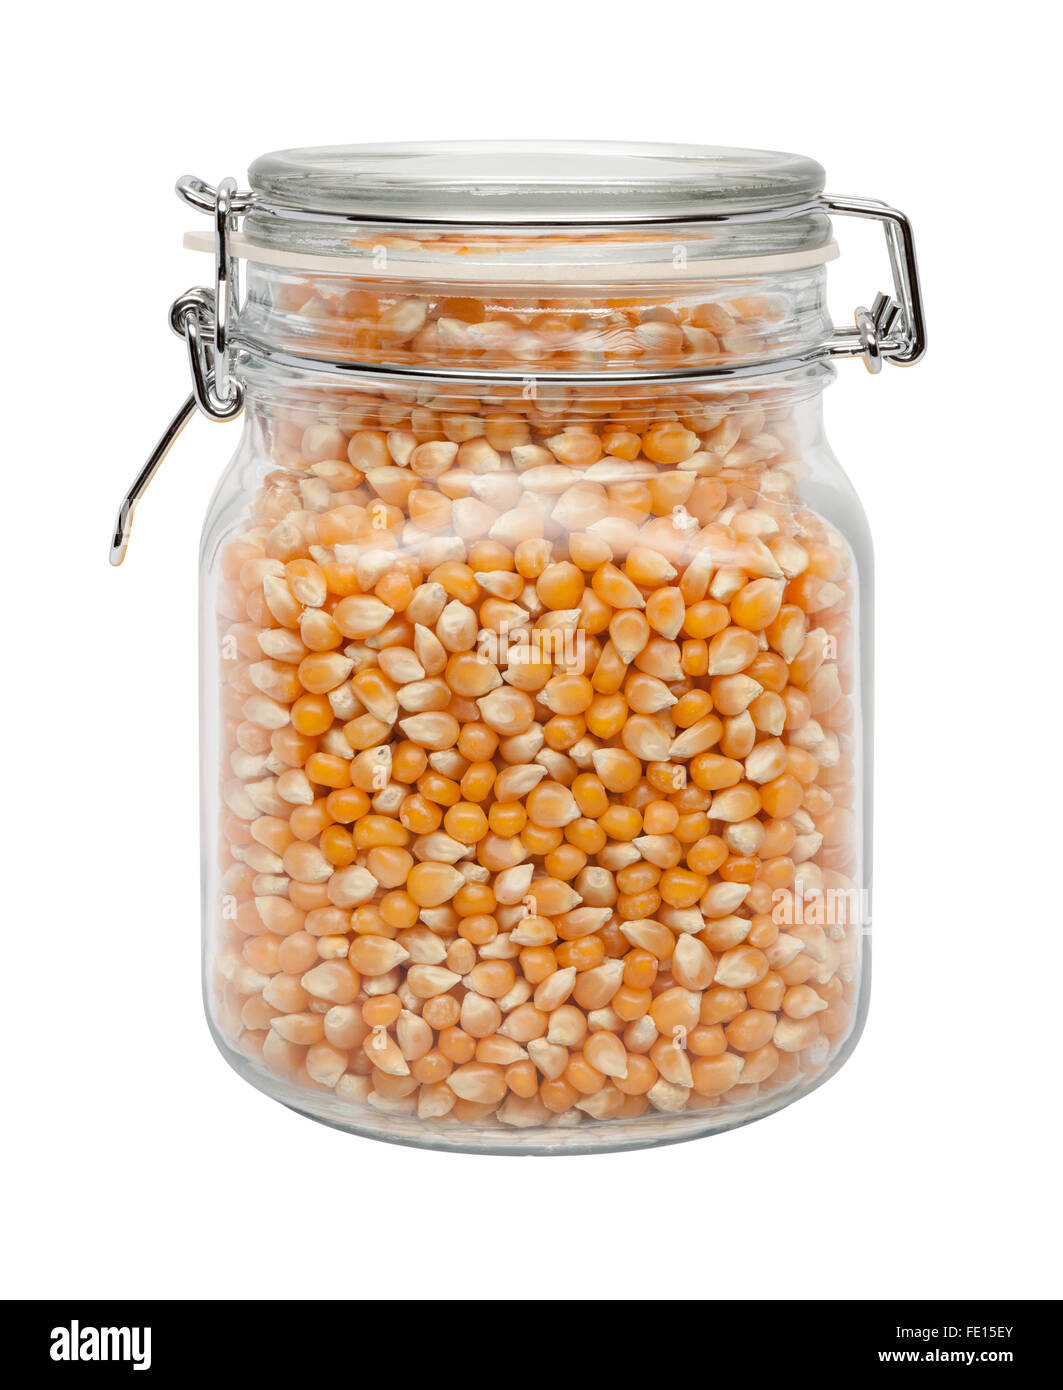 Uncooked Popcorn in a Glass Canister with a Metal Clamp. The image is a cut out, isolated on a white background. Stock Photo